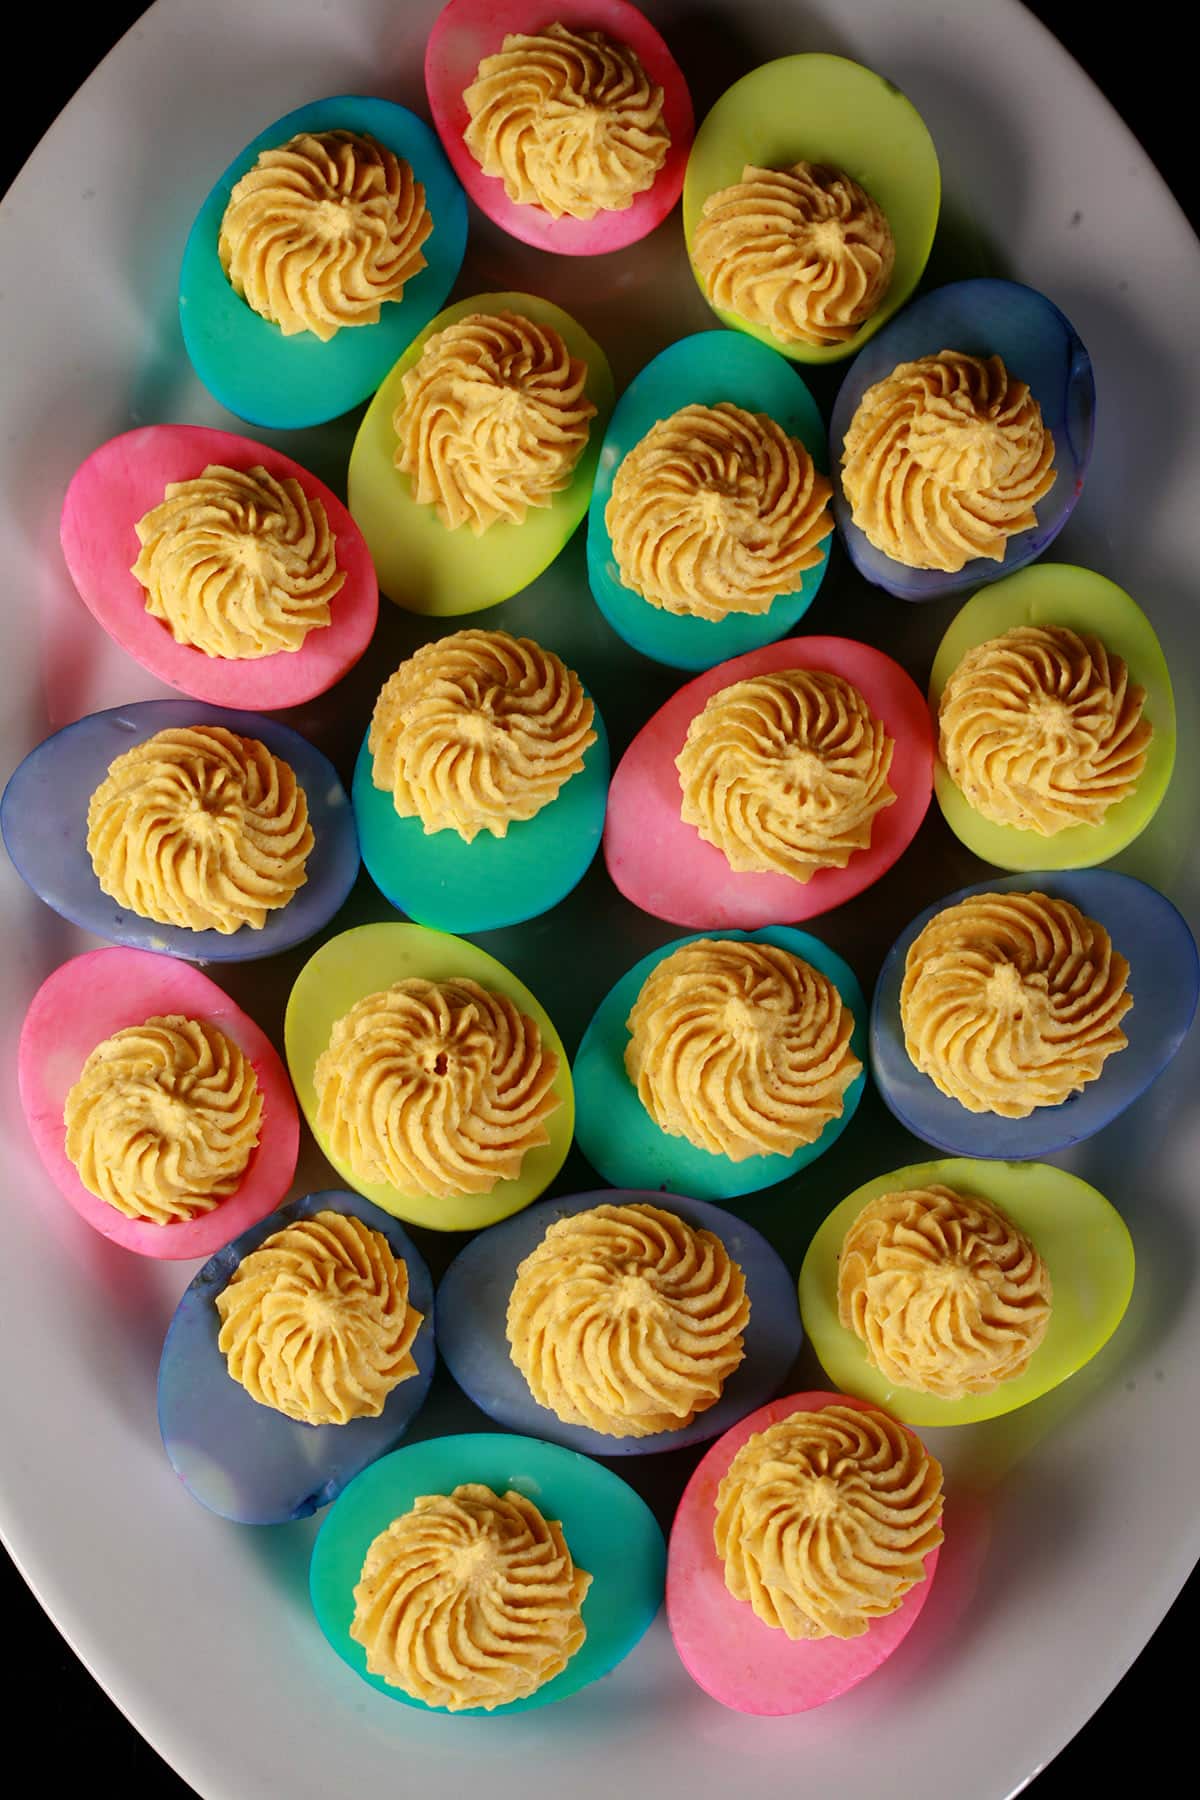 A serving plate of Easter Deviled eggs - yellow yolk mixture piped in swirls onto multicolored egg whites.